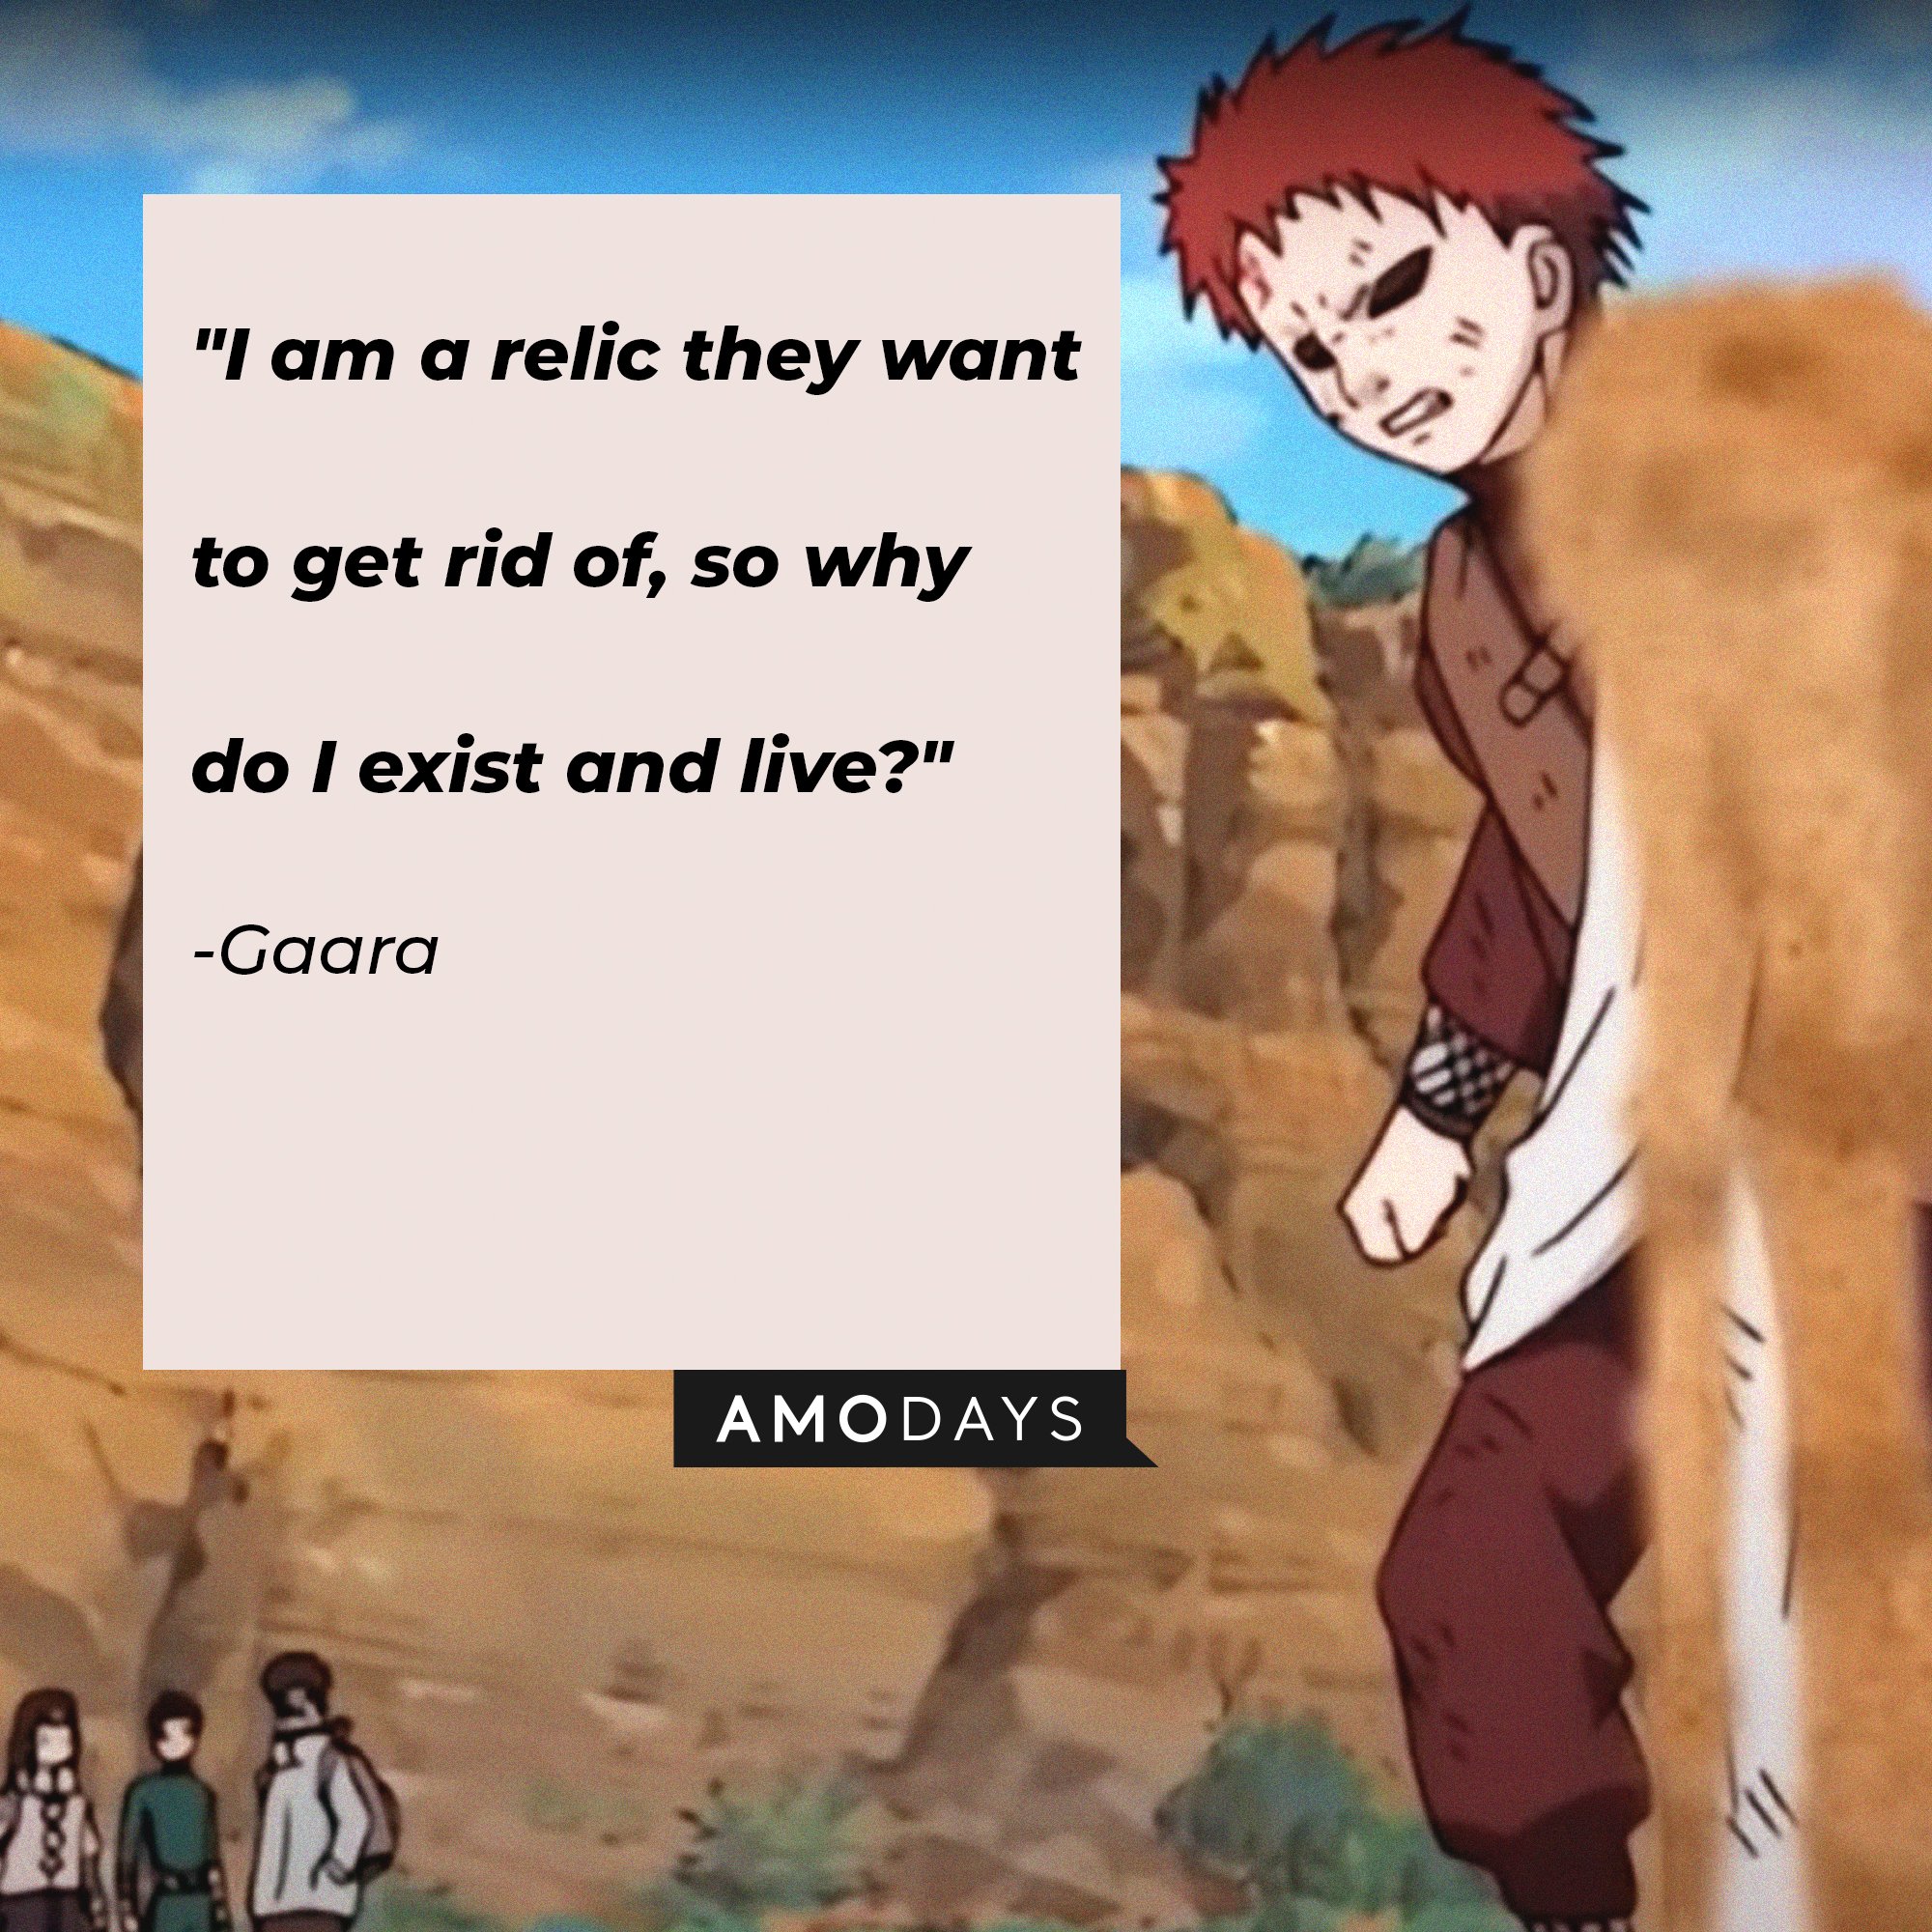 Gaara’s quote: "I am a relic they want to get rid of, so why do I exist and live?" | Image: AmoDays